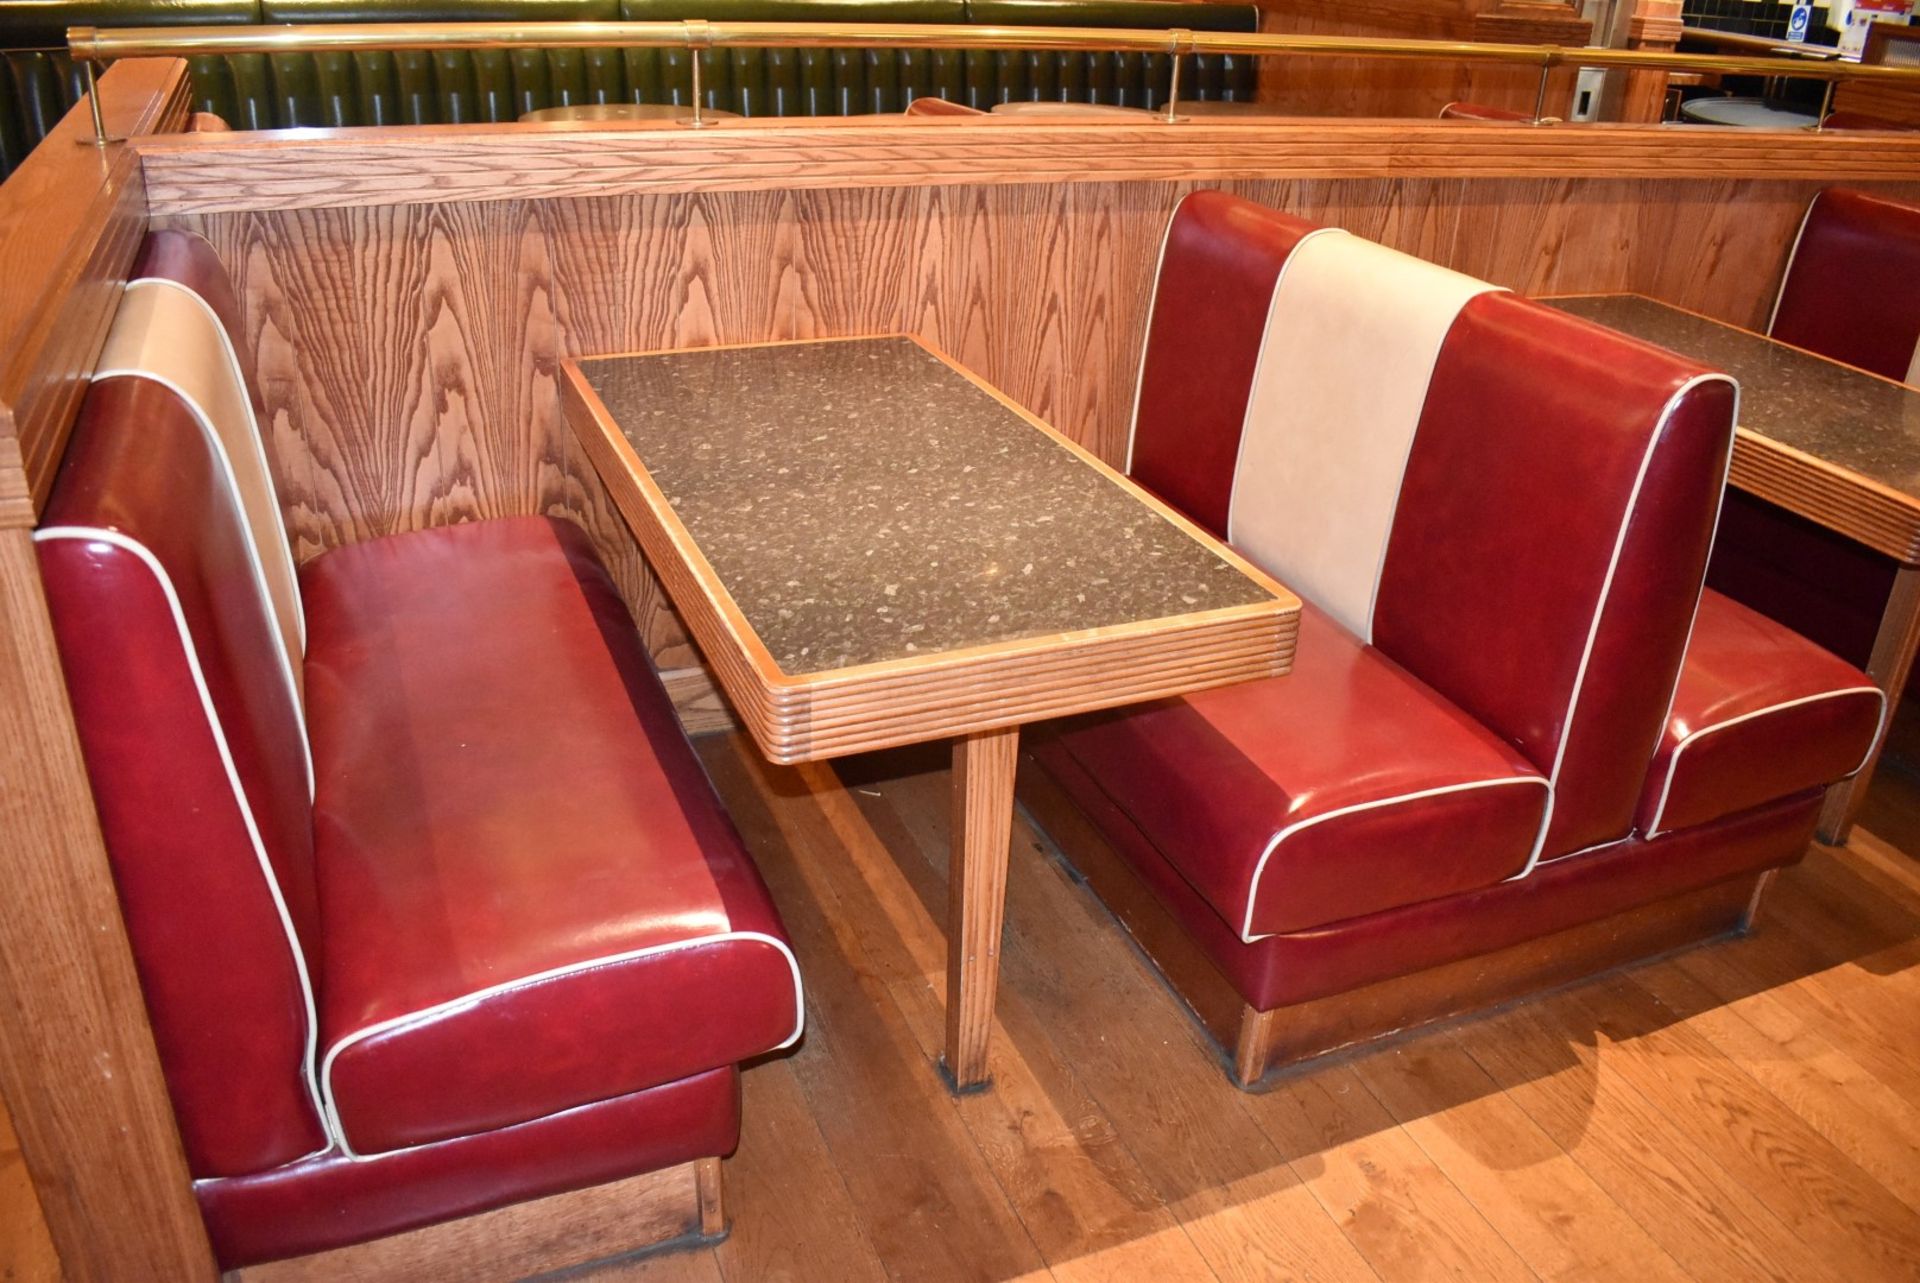 Selection of Double Seating Benches and Dining Tables to Seat Upto 12 Persons - Image 2 of 8